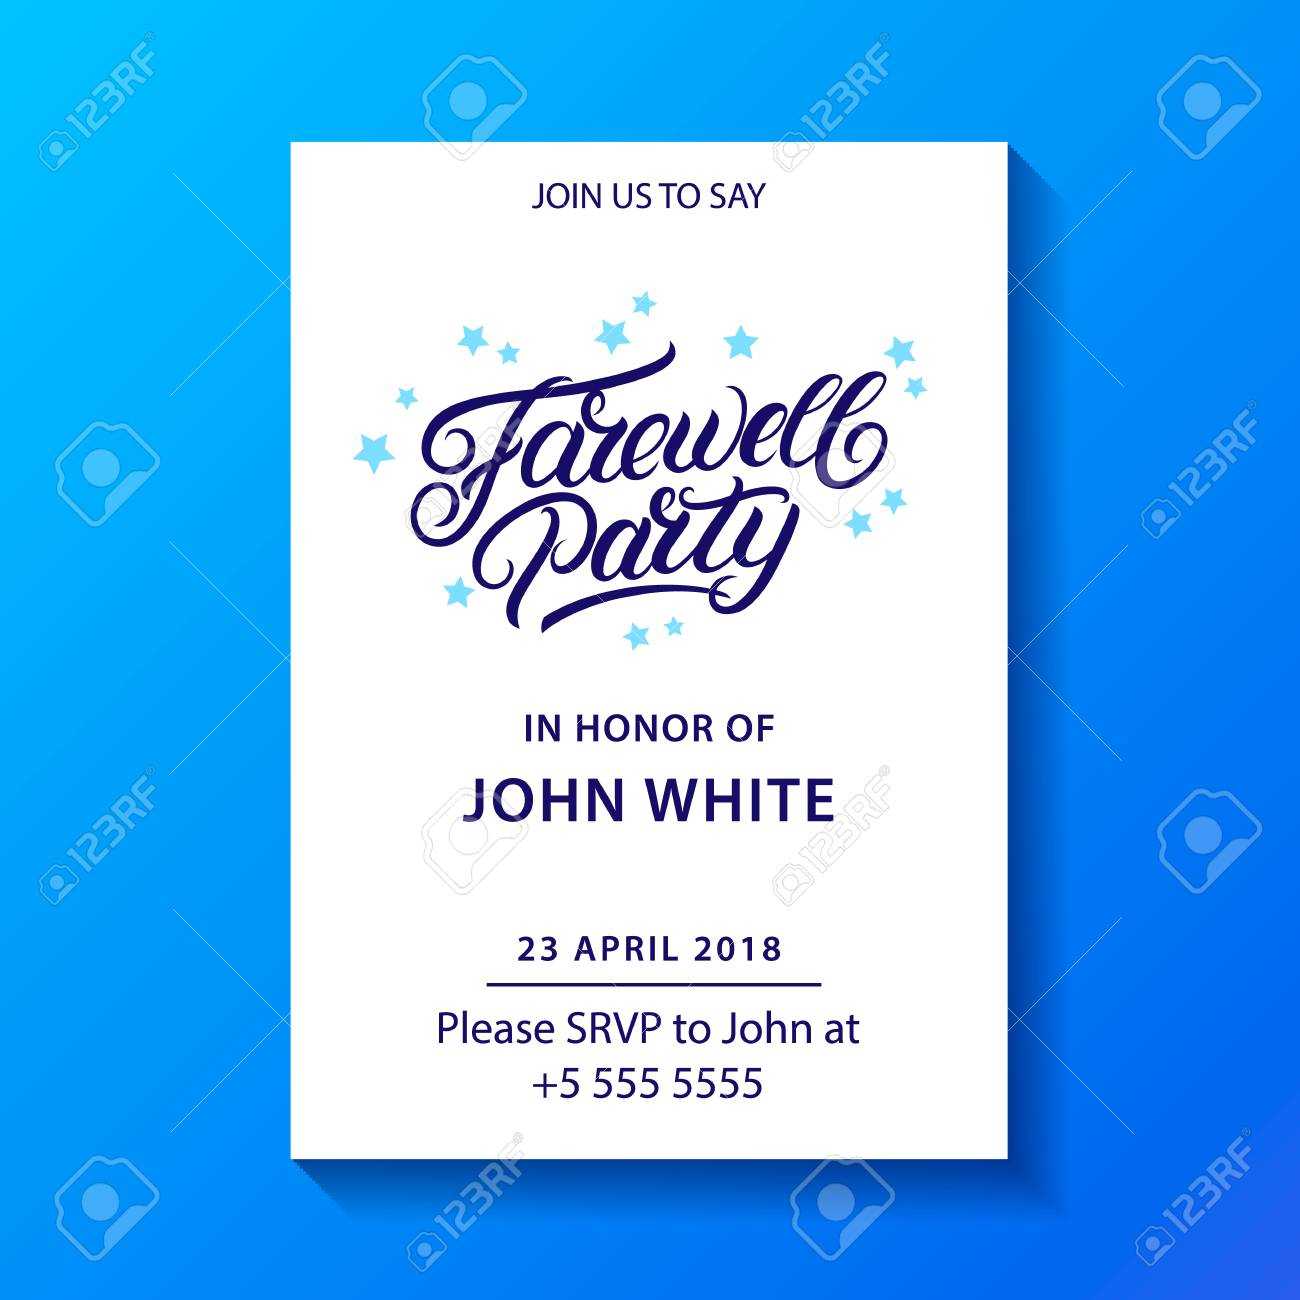 032 Template Ideas Farewell Party Invitations Invitation For With Regard To Farewell Invitation Card Template